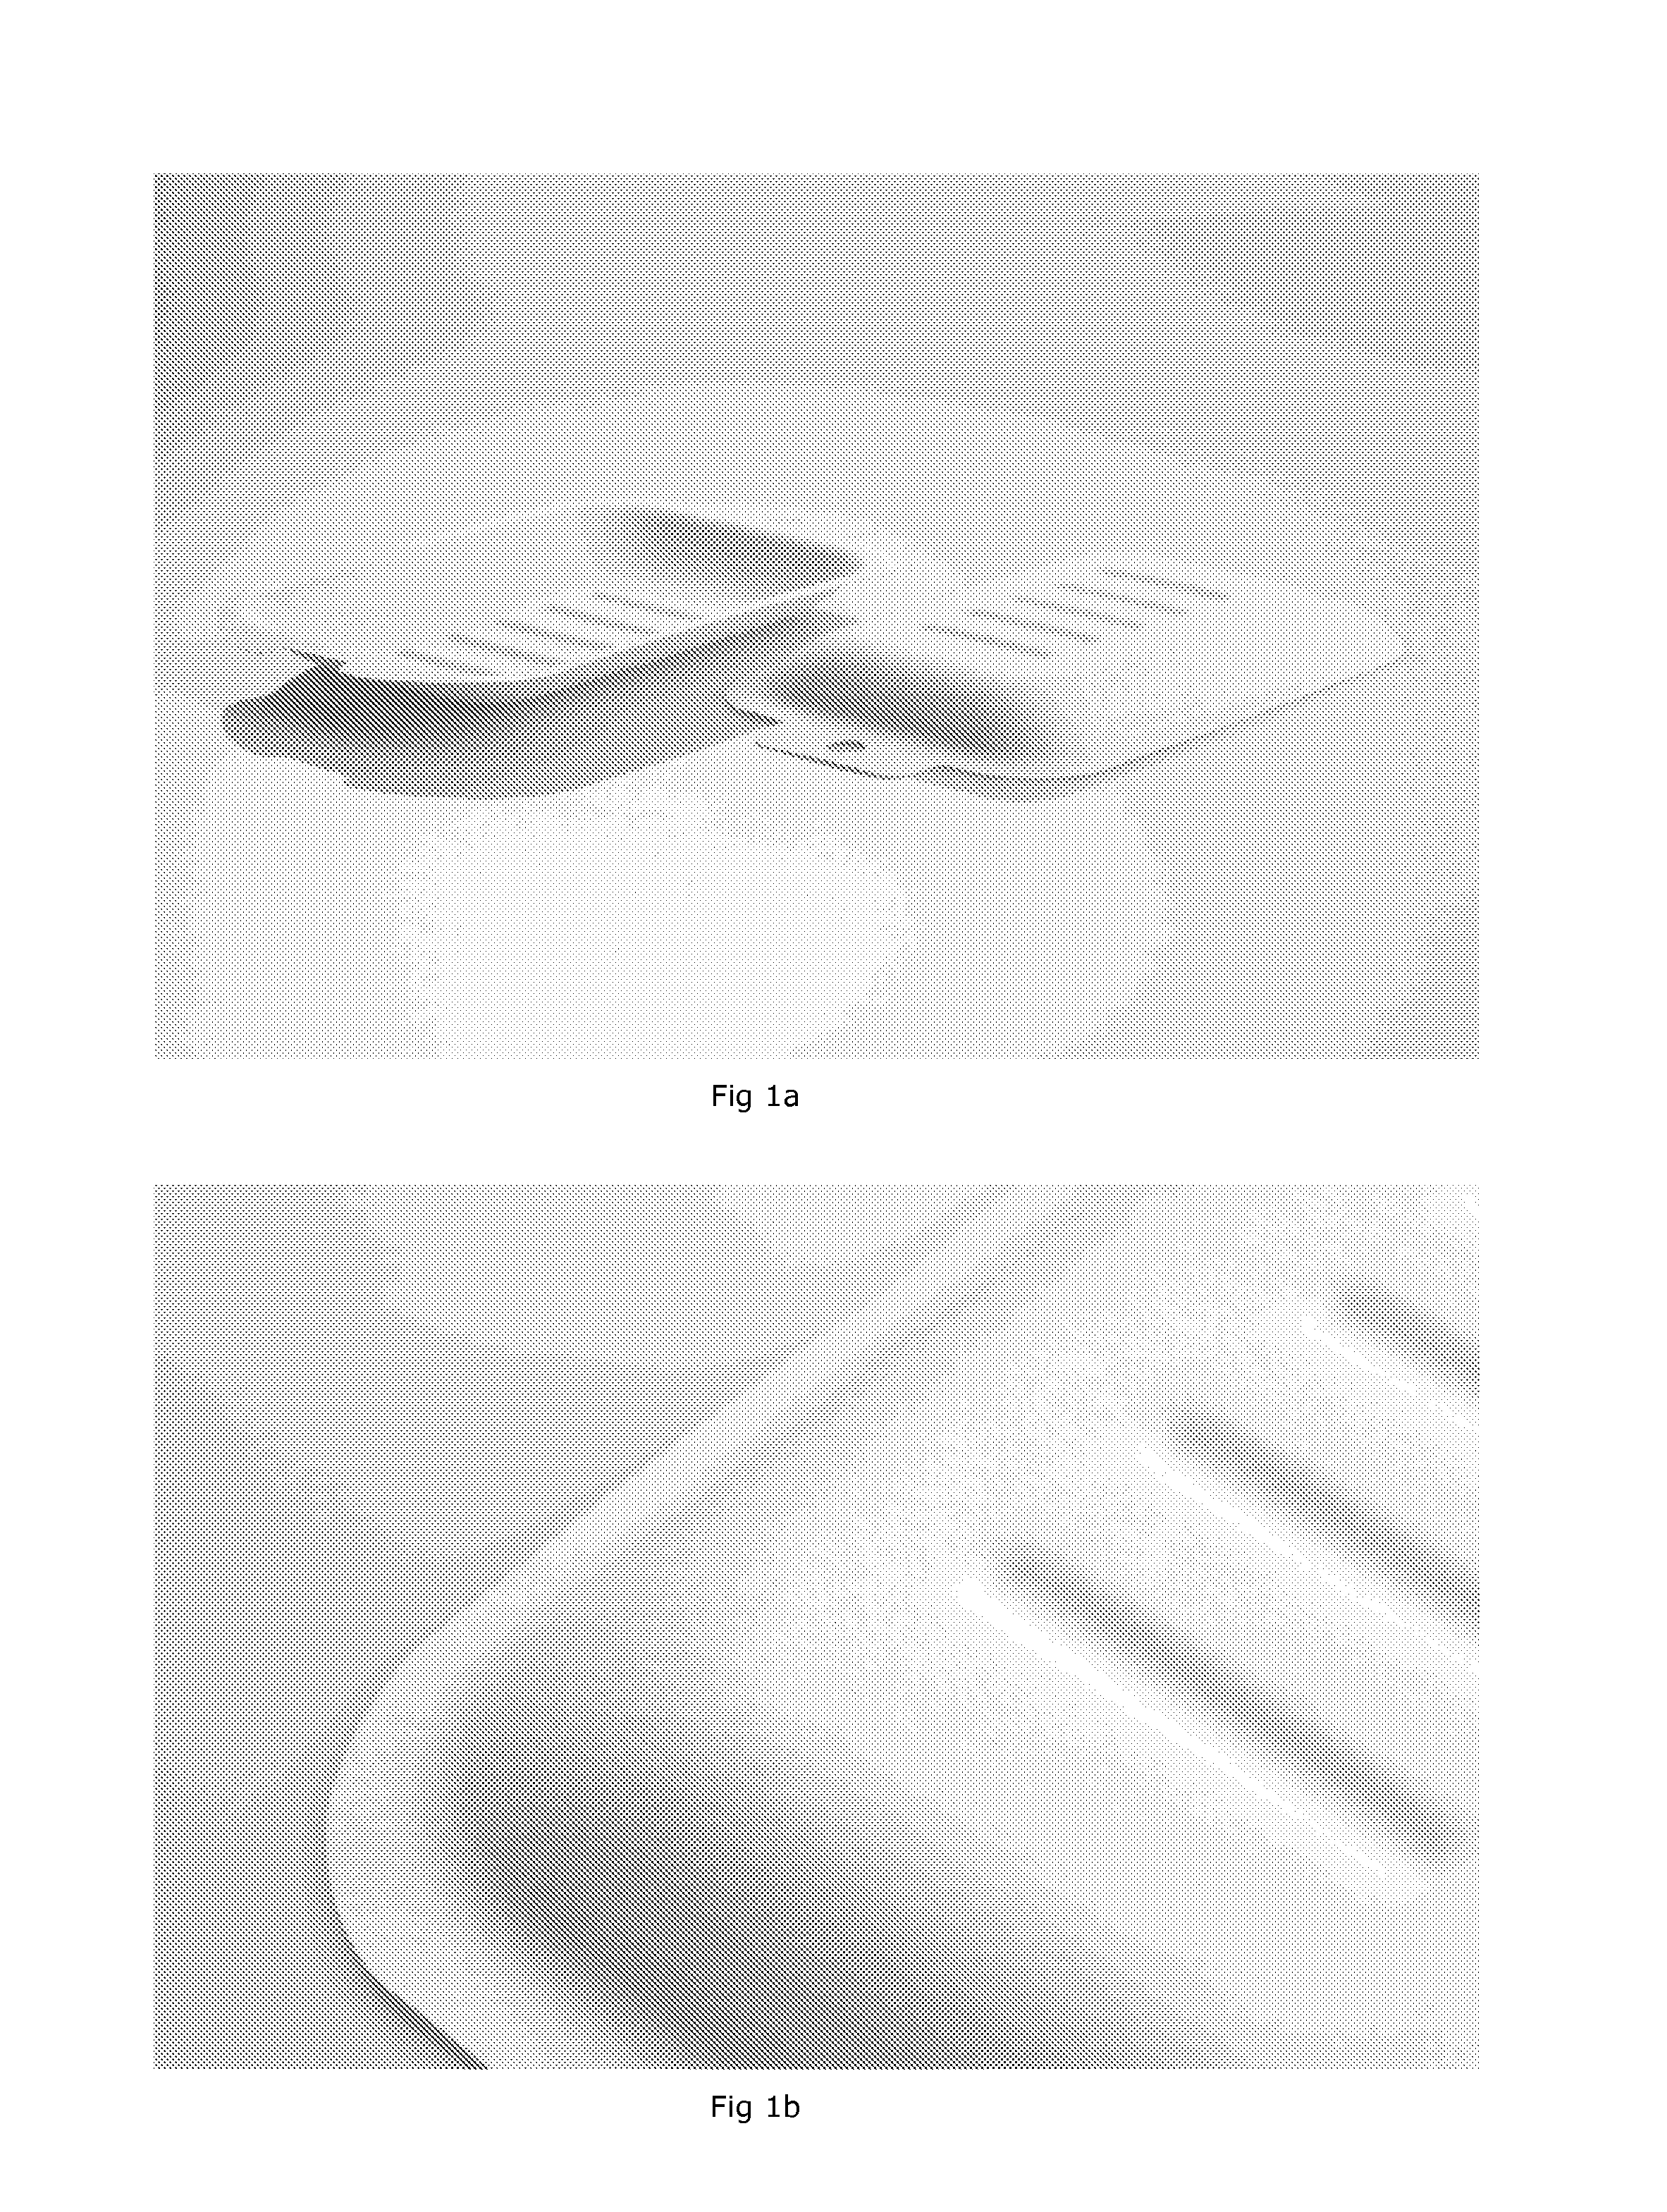 Moldable fibrous product and method of producing the same